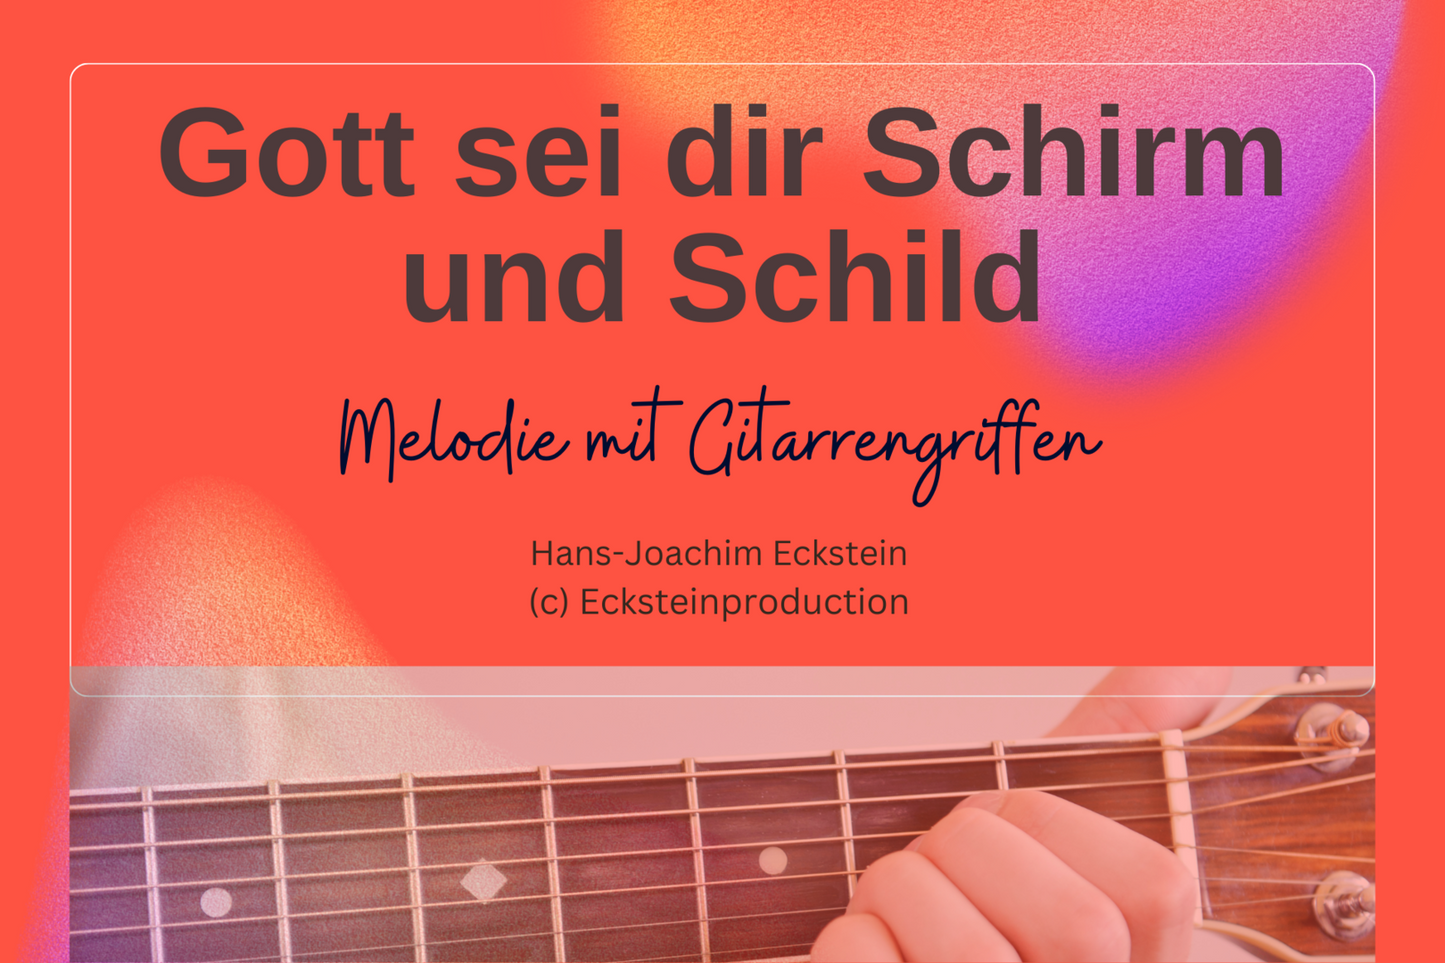 God be your shield and shield (melody with guitar chords) Hans-Joachim Eckstein